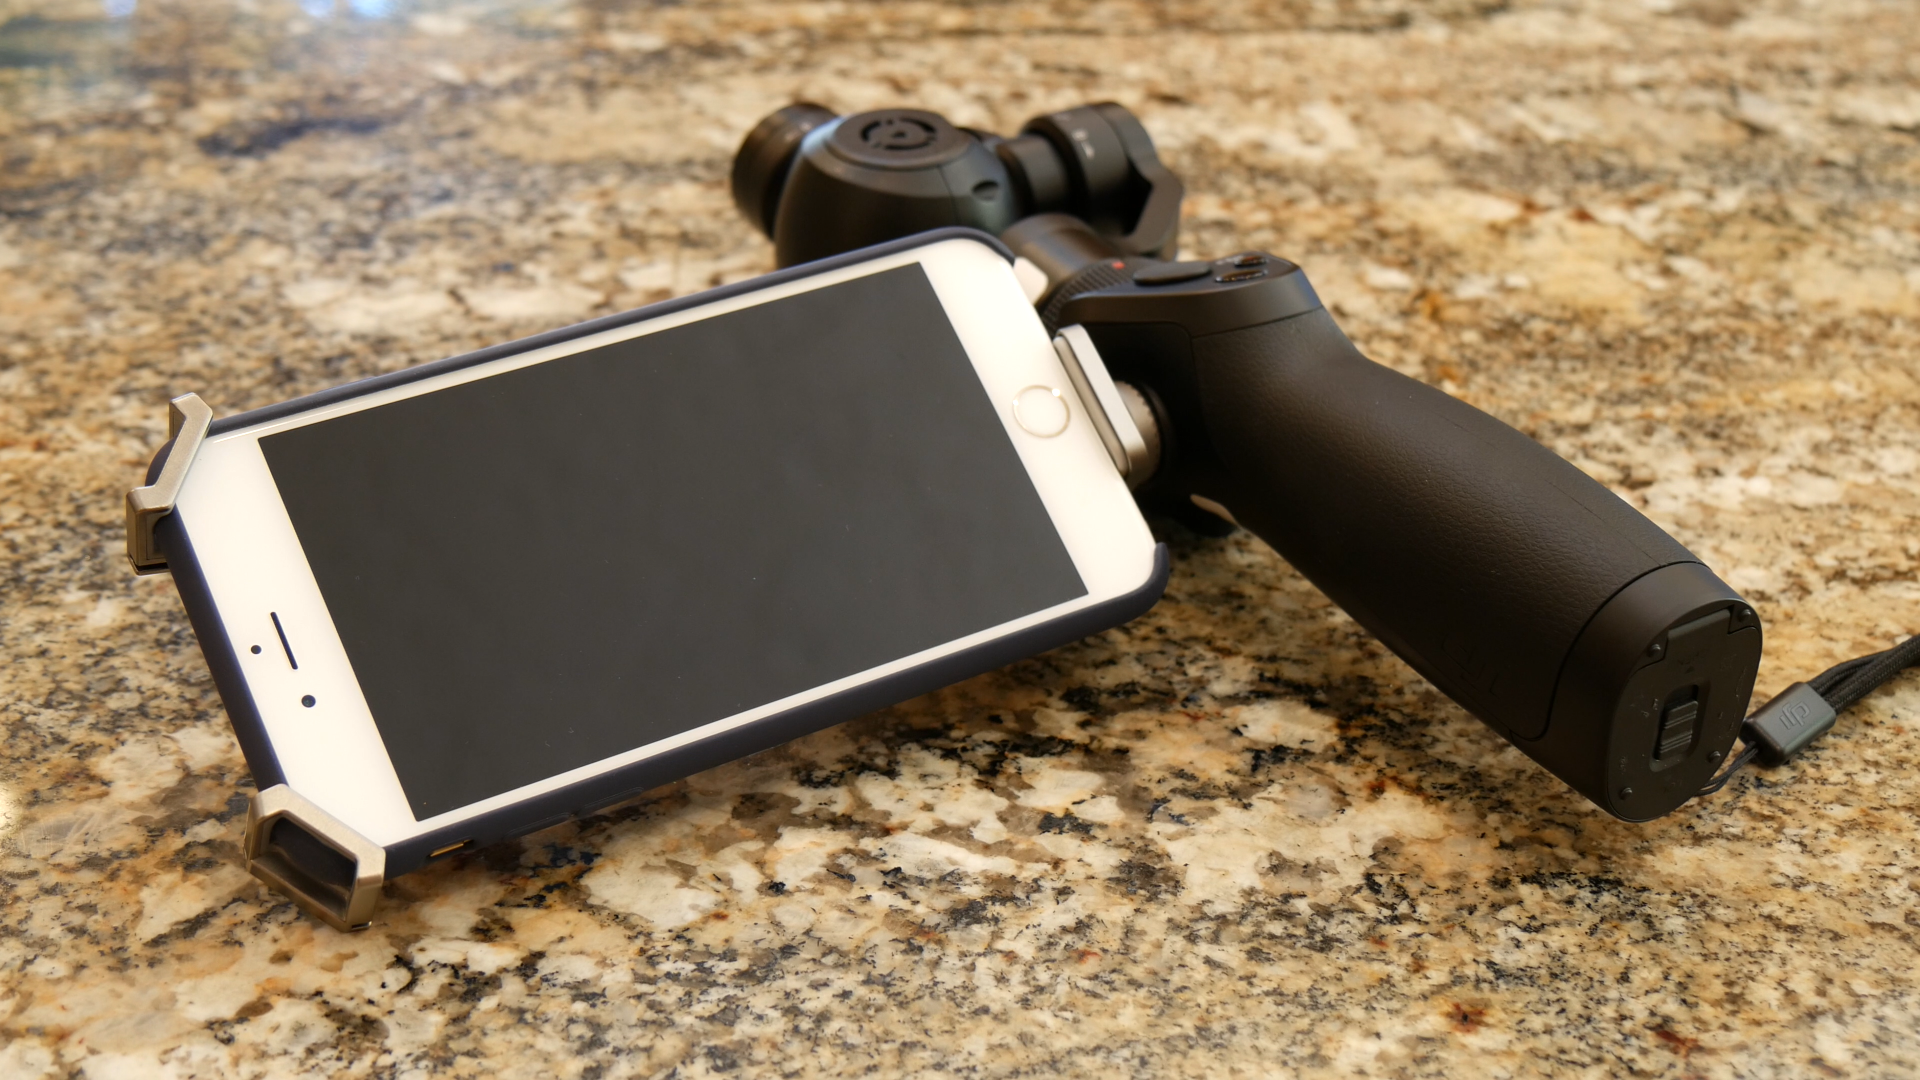 dji osmo video review osmo02